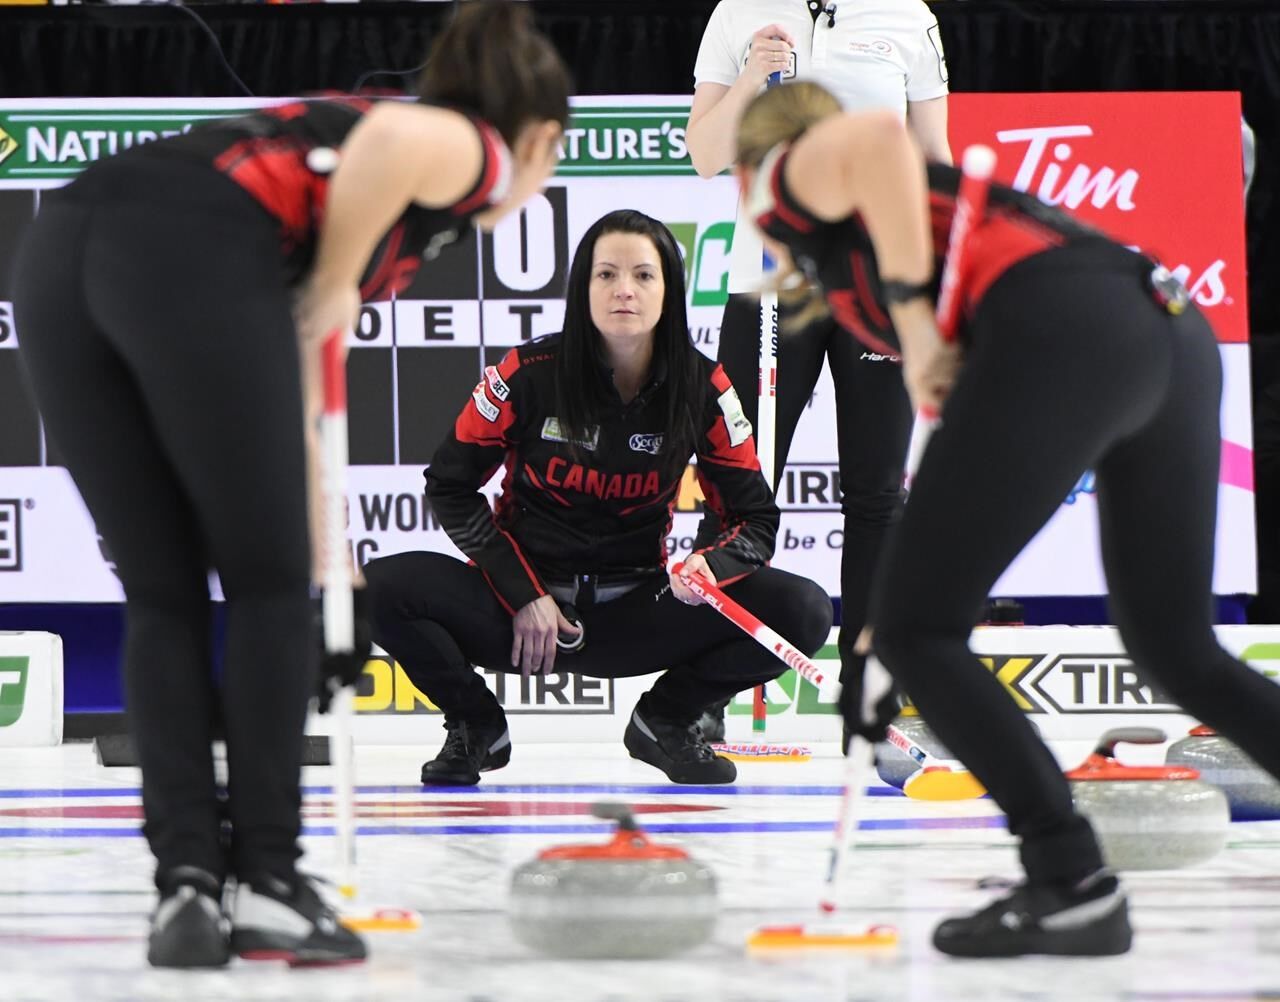 Olympic issues with hog-line sensors in curling stones continue at womens worlds